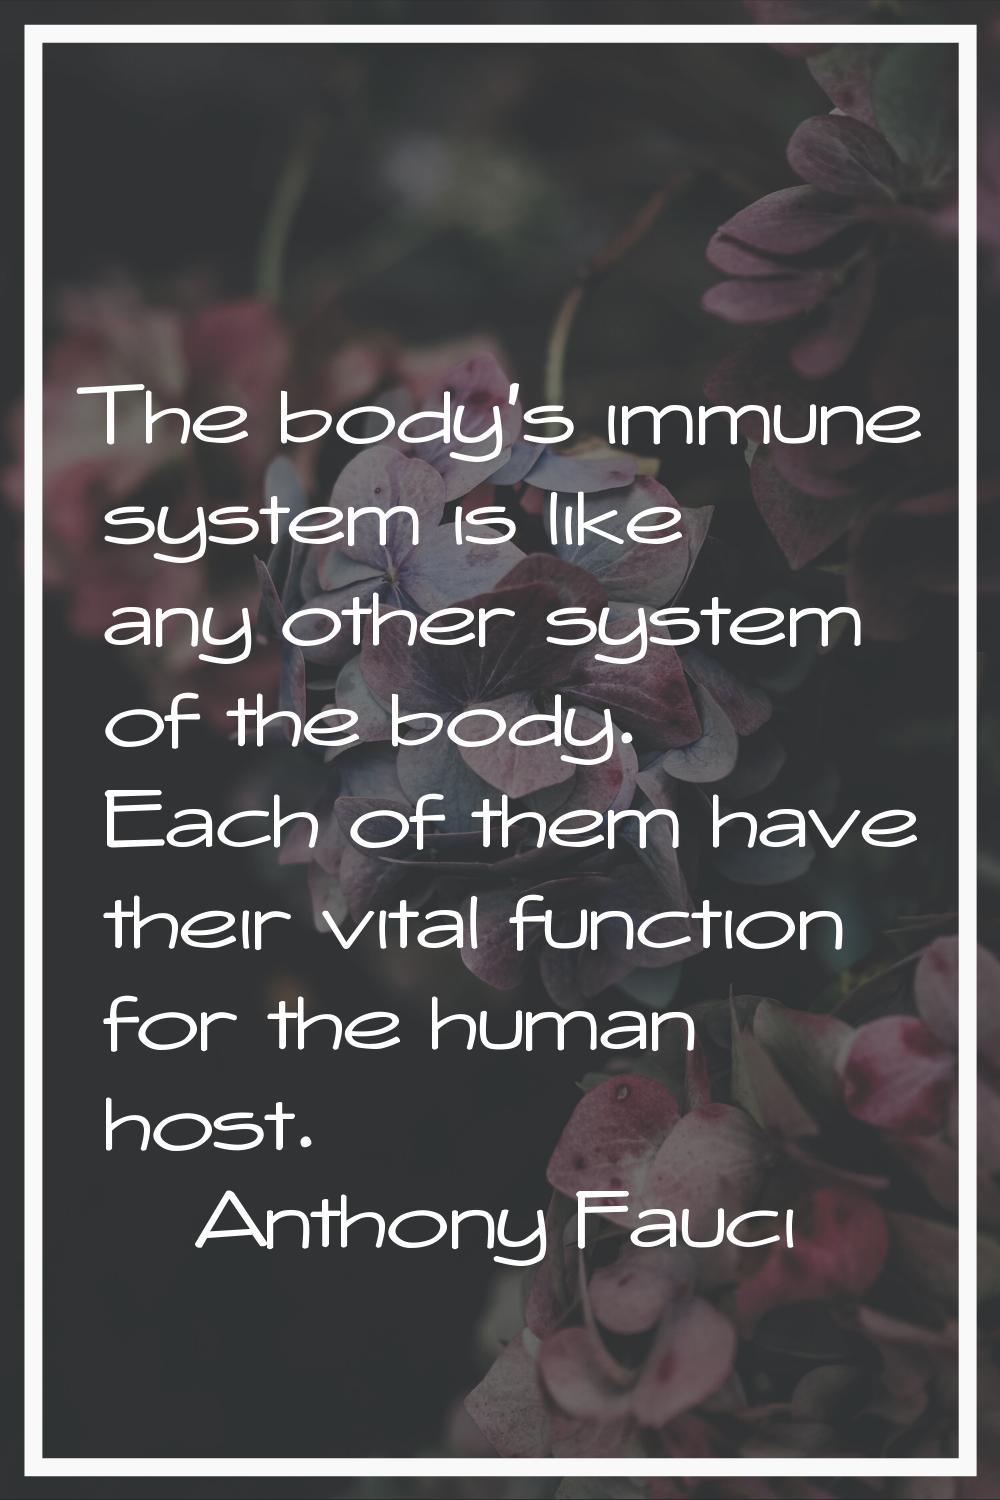 The body's immune system is like any other system of the body. Each of them have their vital functi